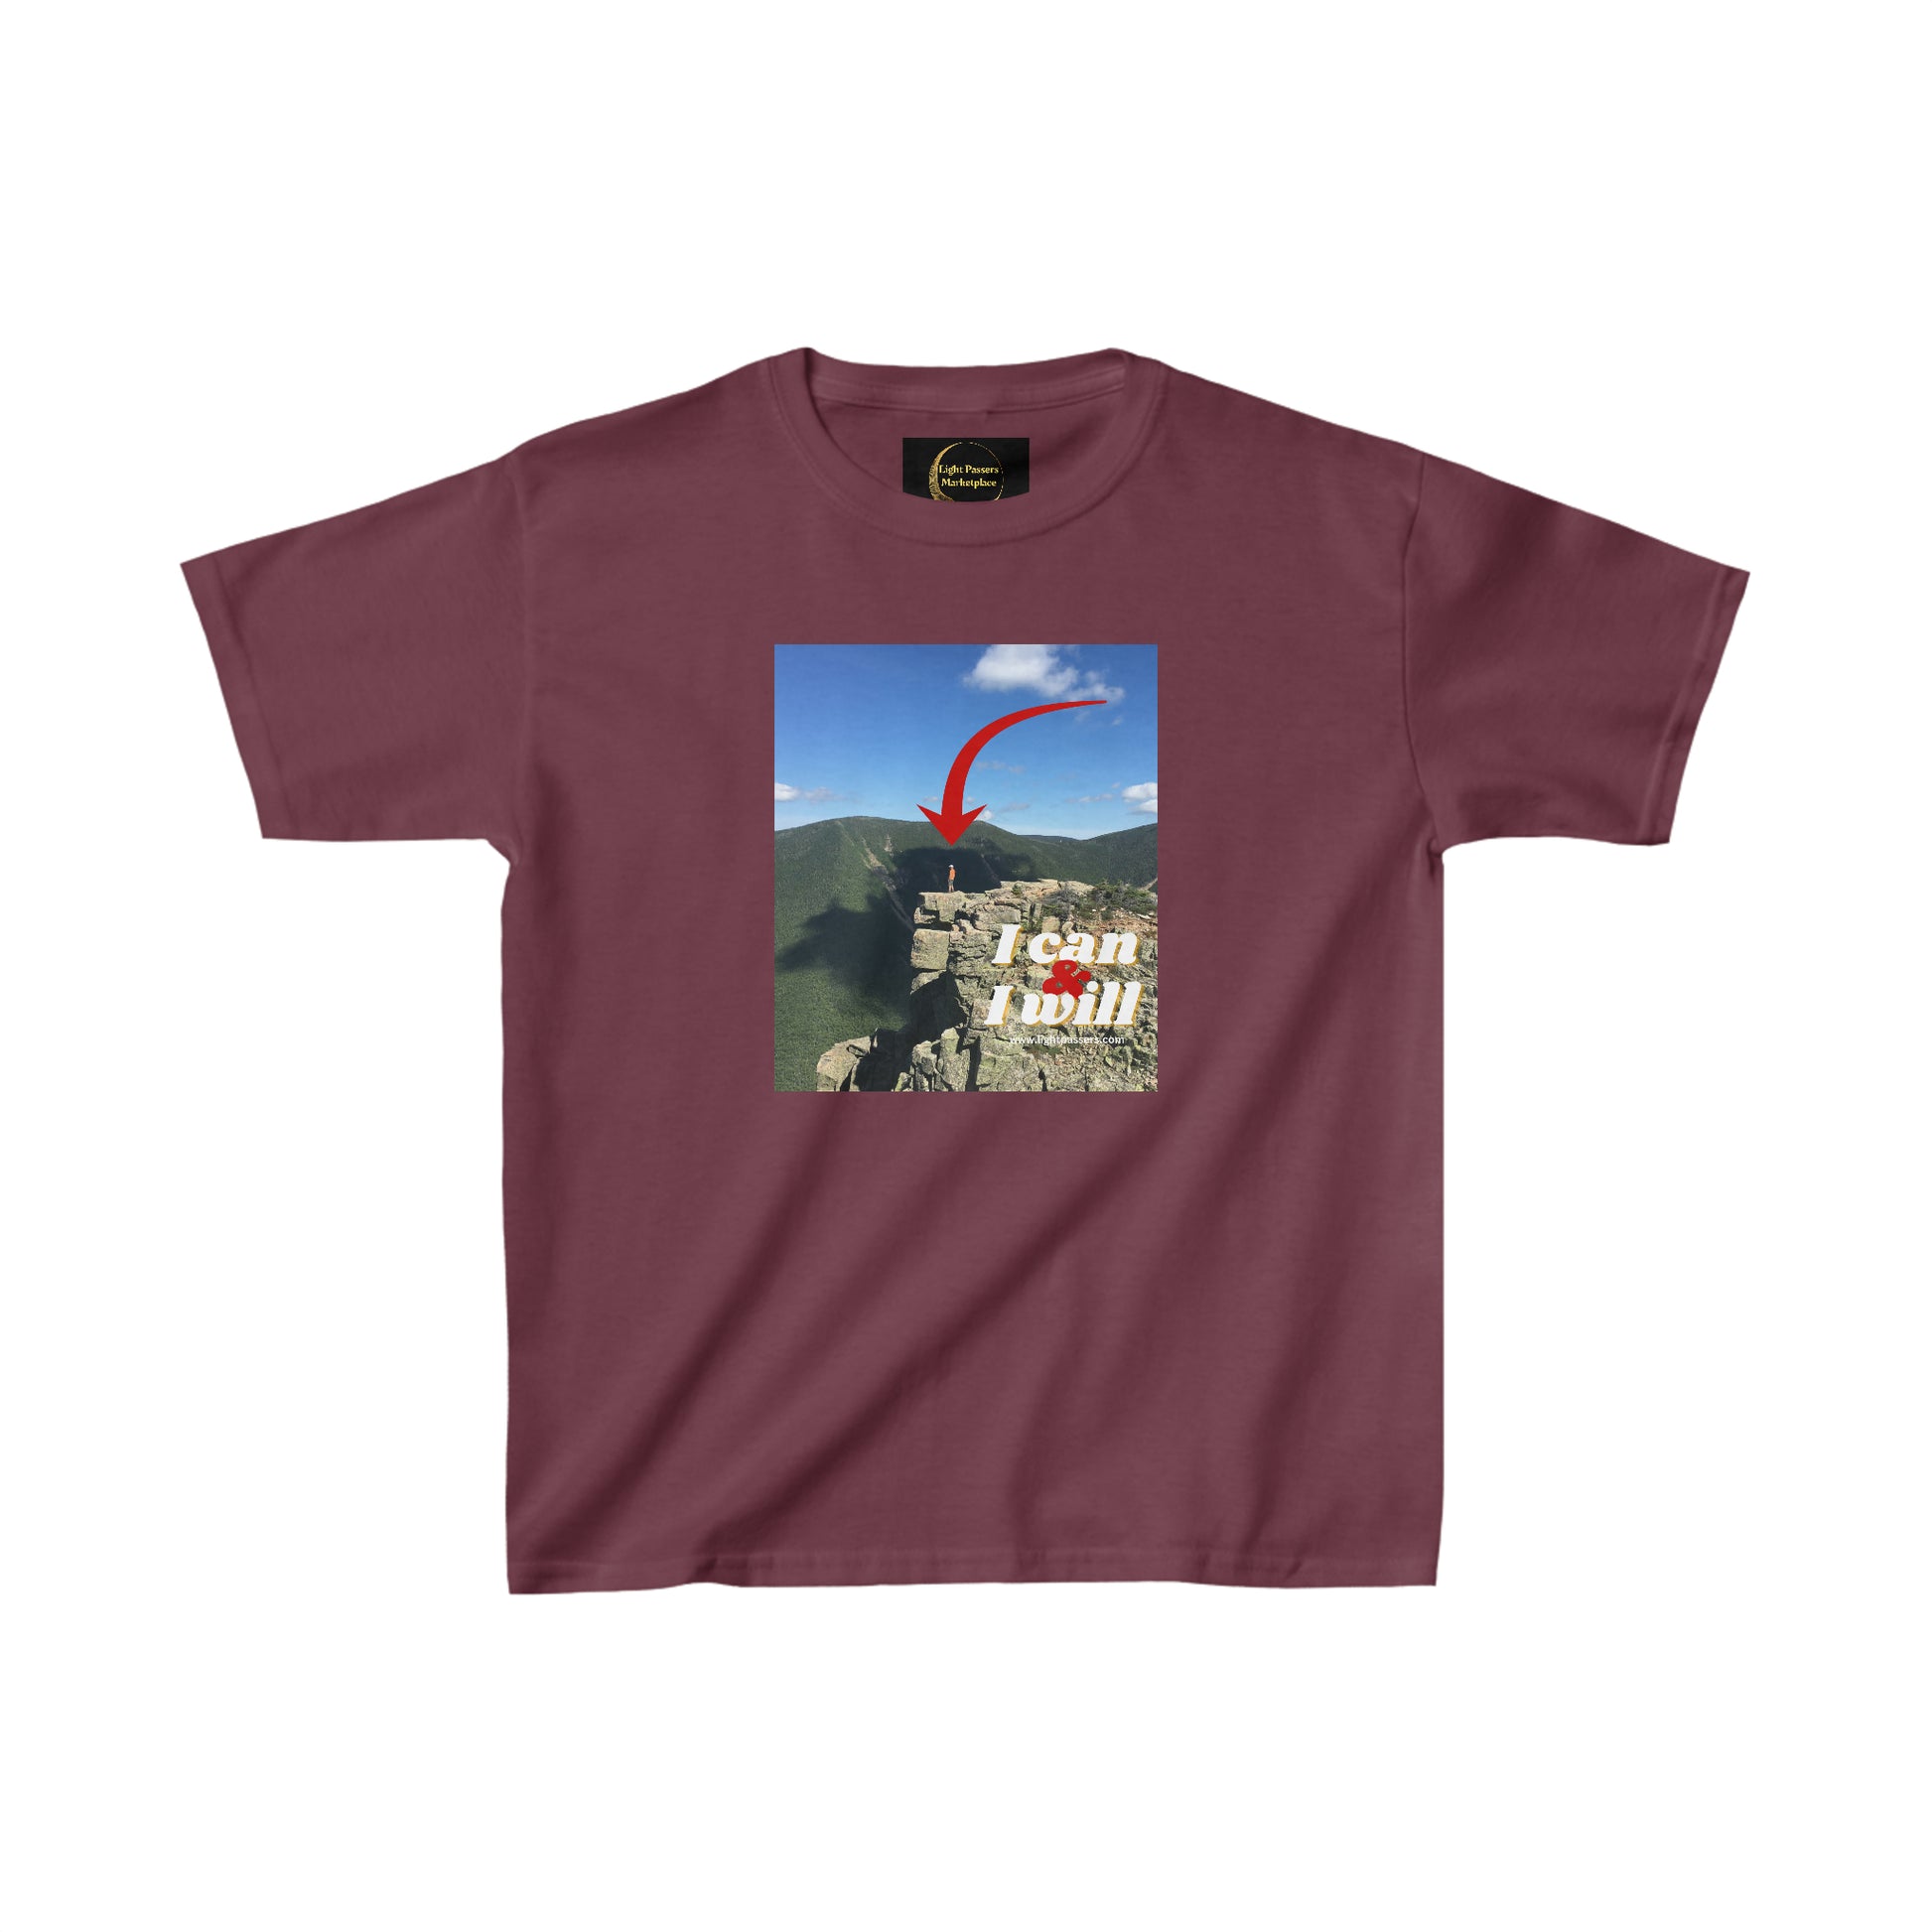 A youth t-shirt featuring a mountain and red arrow graphic, ideal for everyday wear. Made of 100% cotton with twill tape shoulders for durability and a curl-resistant collar. Ethically sourced US cotton.